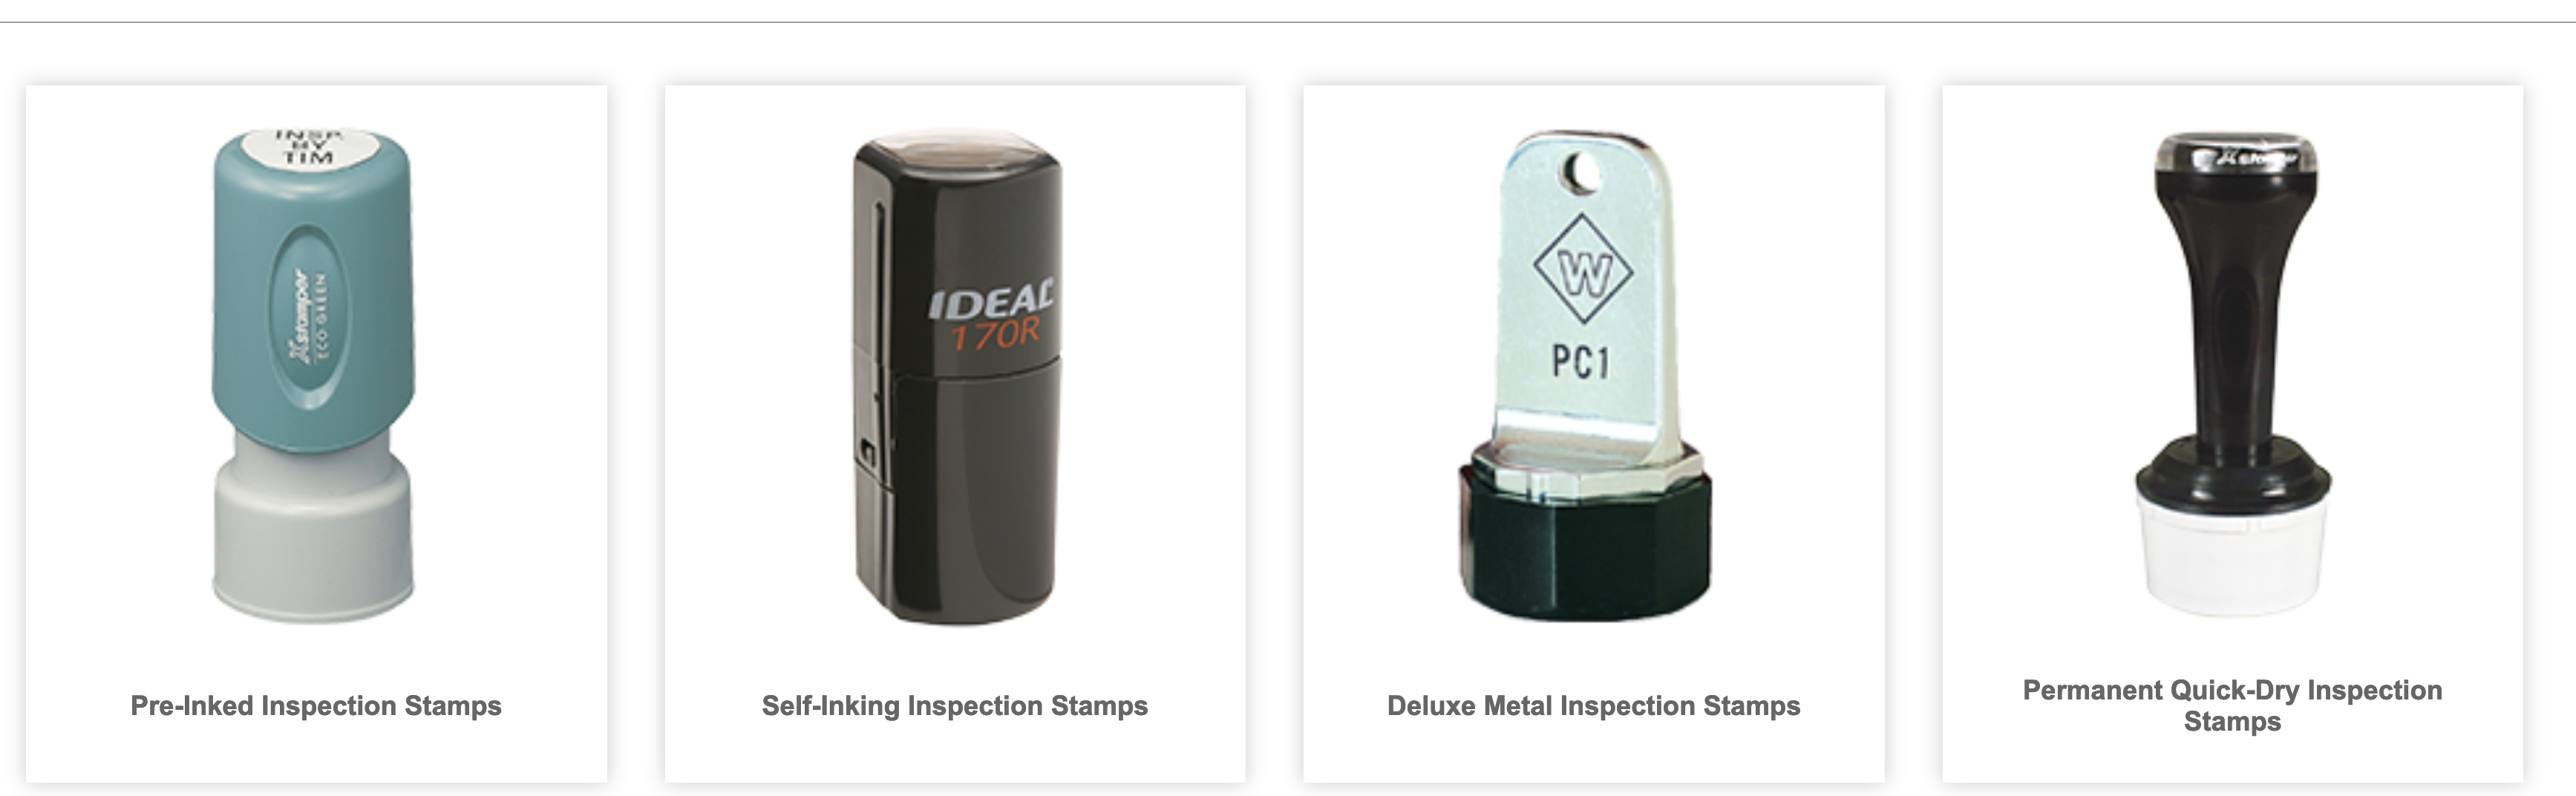 Specialized Rubber Stamps by Industry